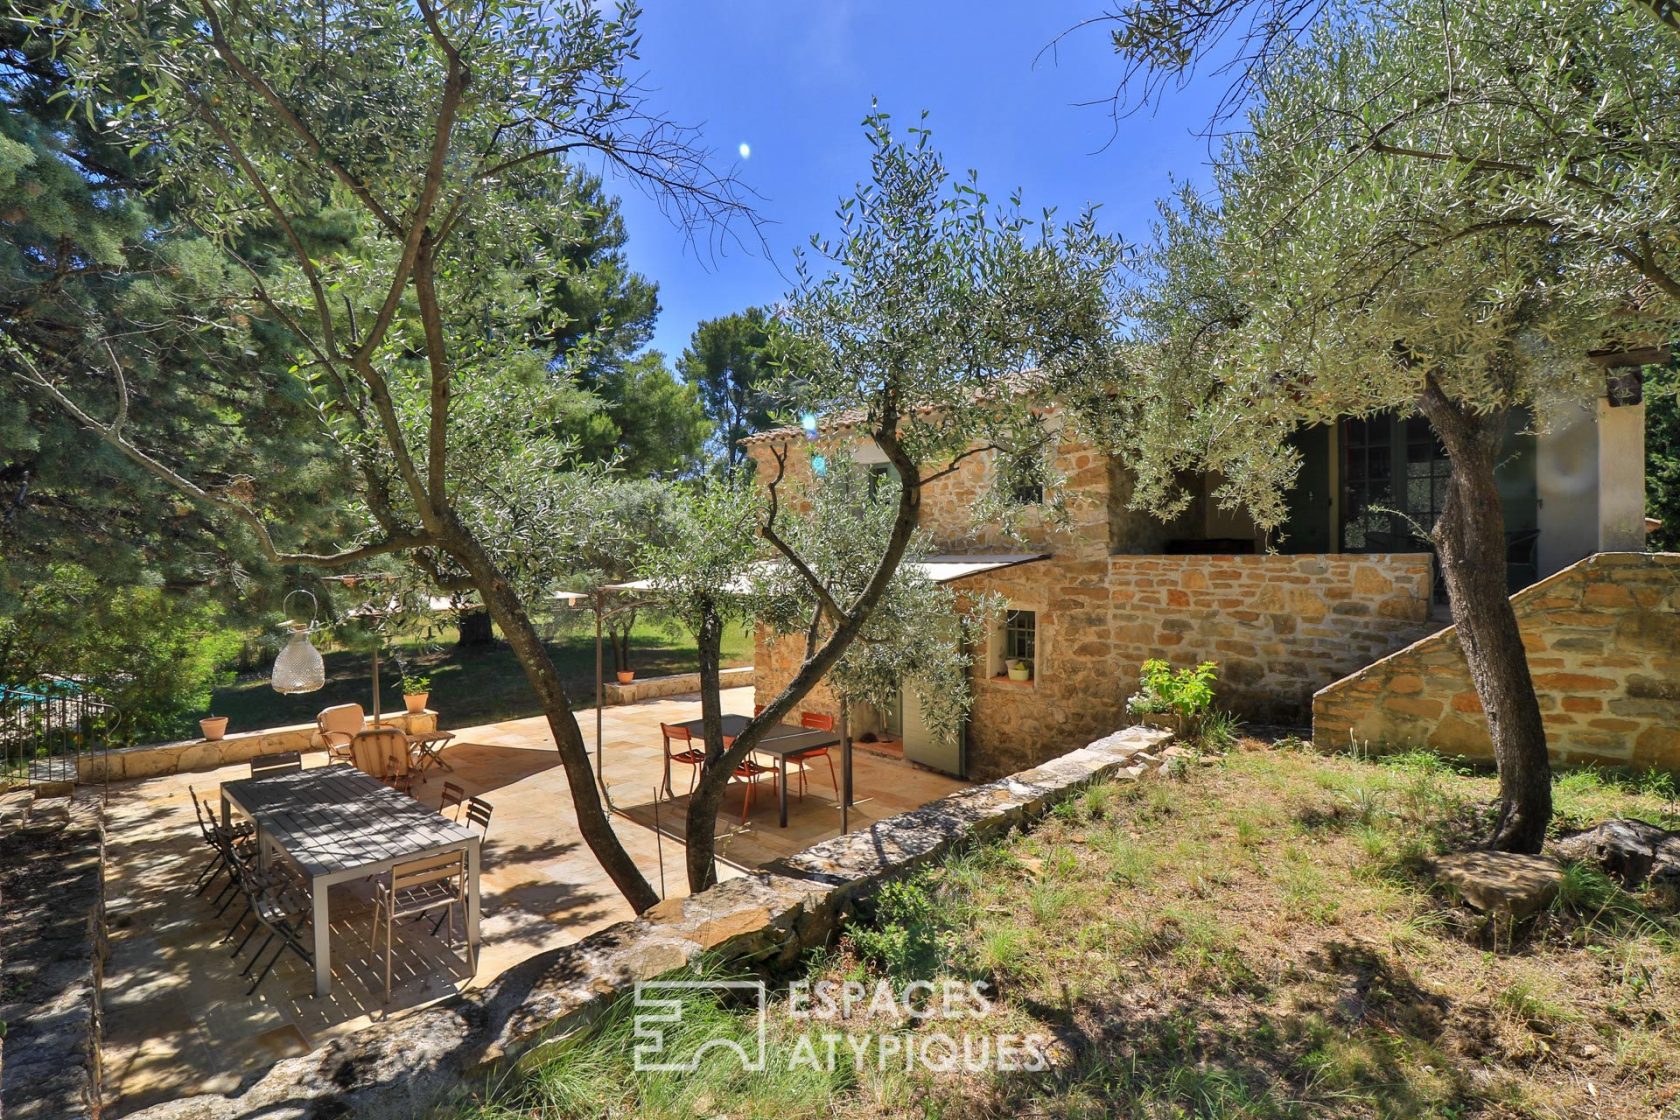 Provencal property surrounded by nature